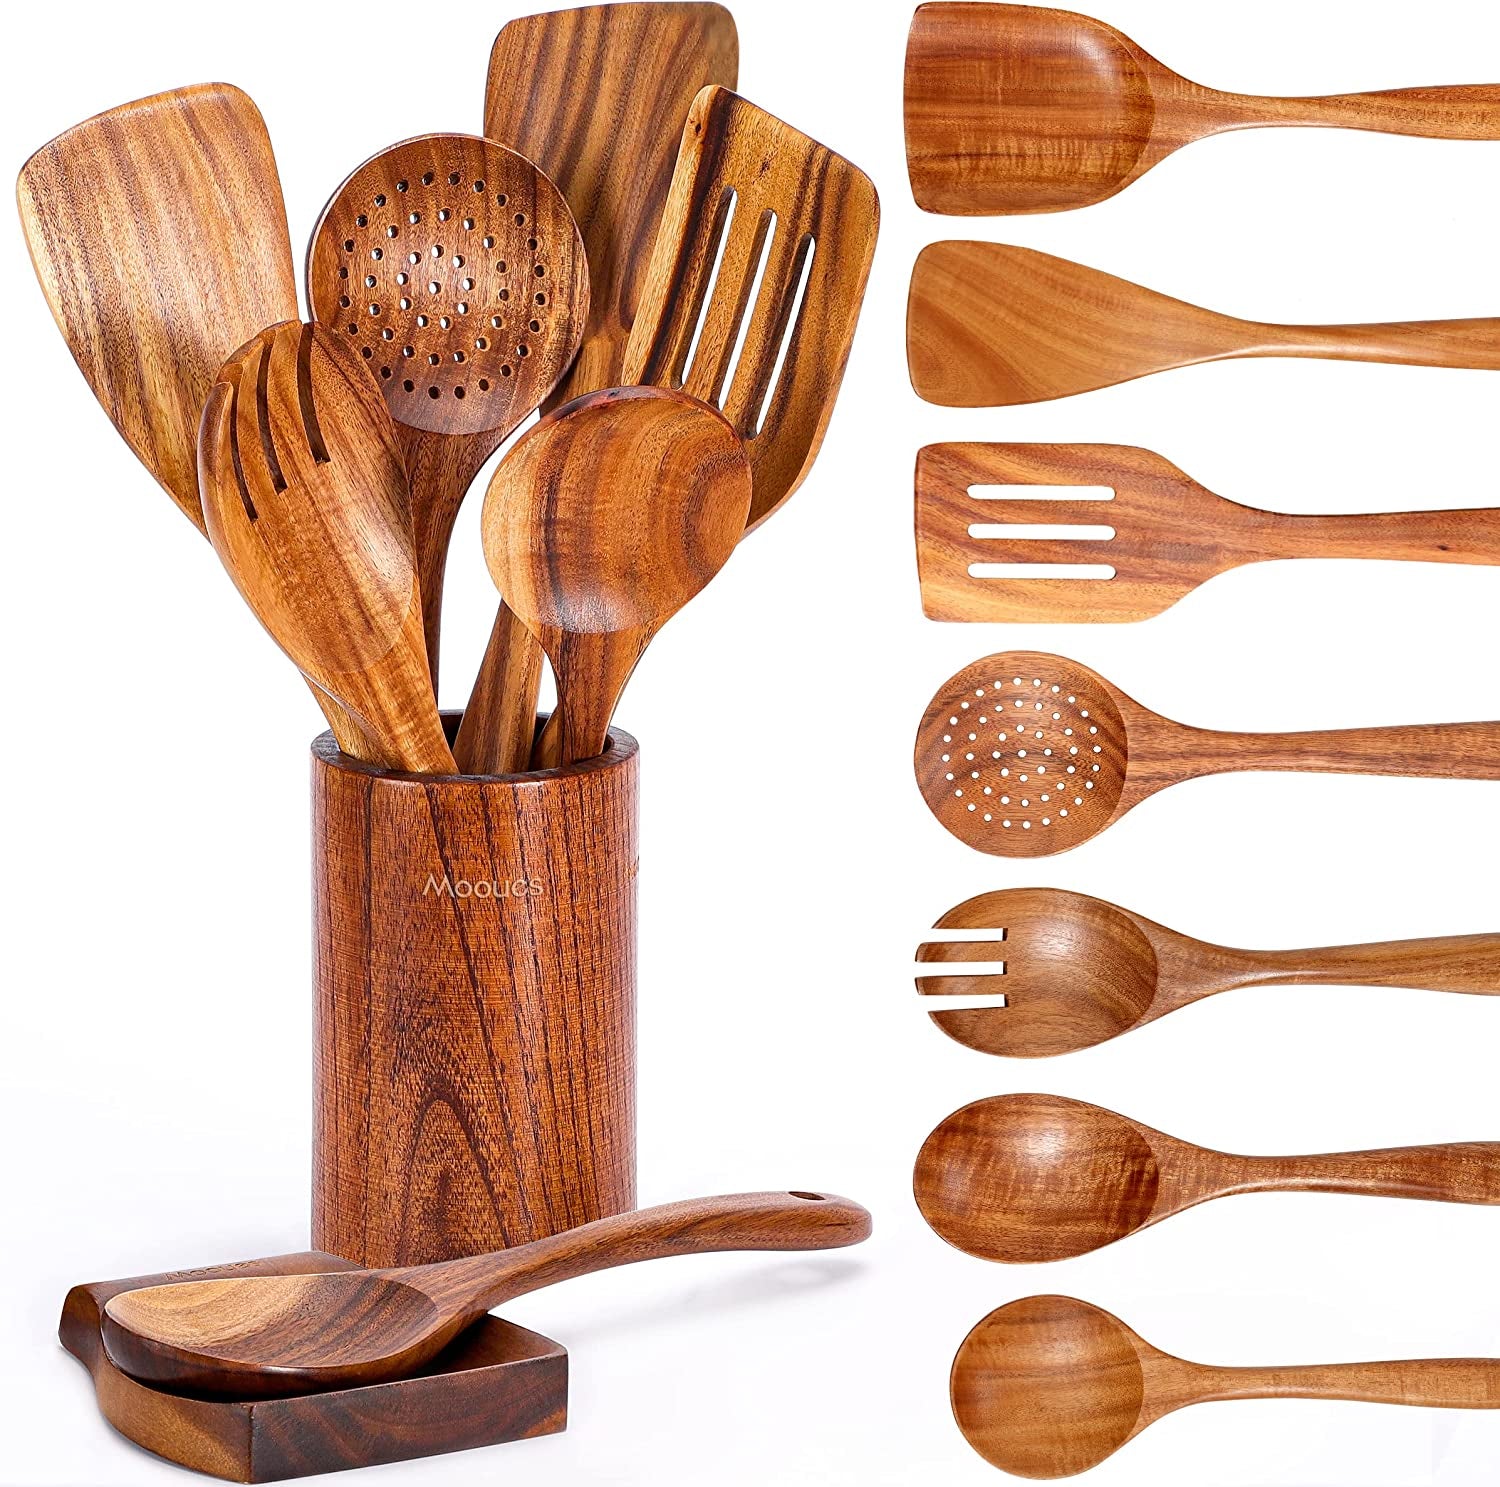 9 PCS Wooden Spoons for Cooking, Wooden Utensils for Cooking with Utensils Holder, Natural Teak Wooden Kitchen Utensils Set with Spoon Rest, Comfort Grip Cooking Utensils Set for Kitchen